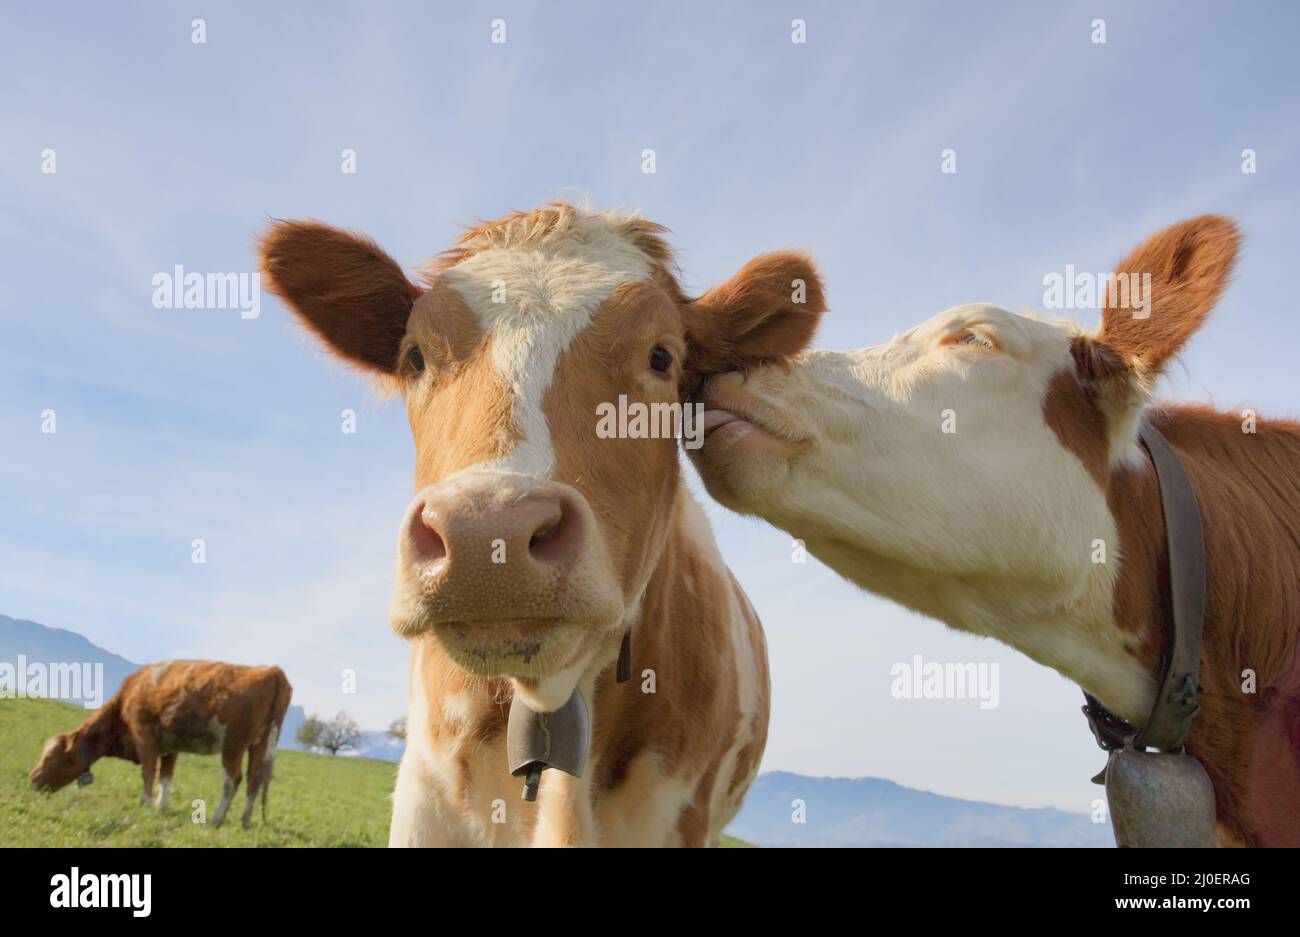 Agricultural, agriculture, animal, animal themes, beef, bovine, cattle, country, countryside, cow, c Stock Photo